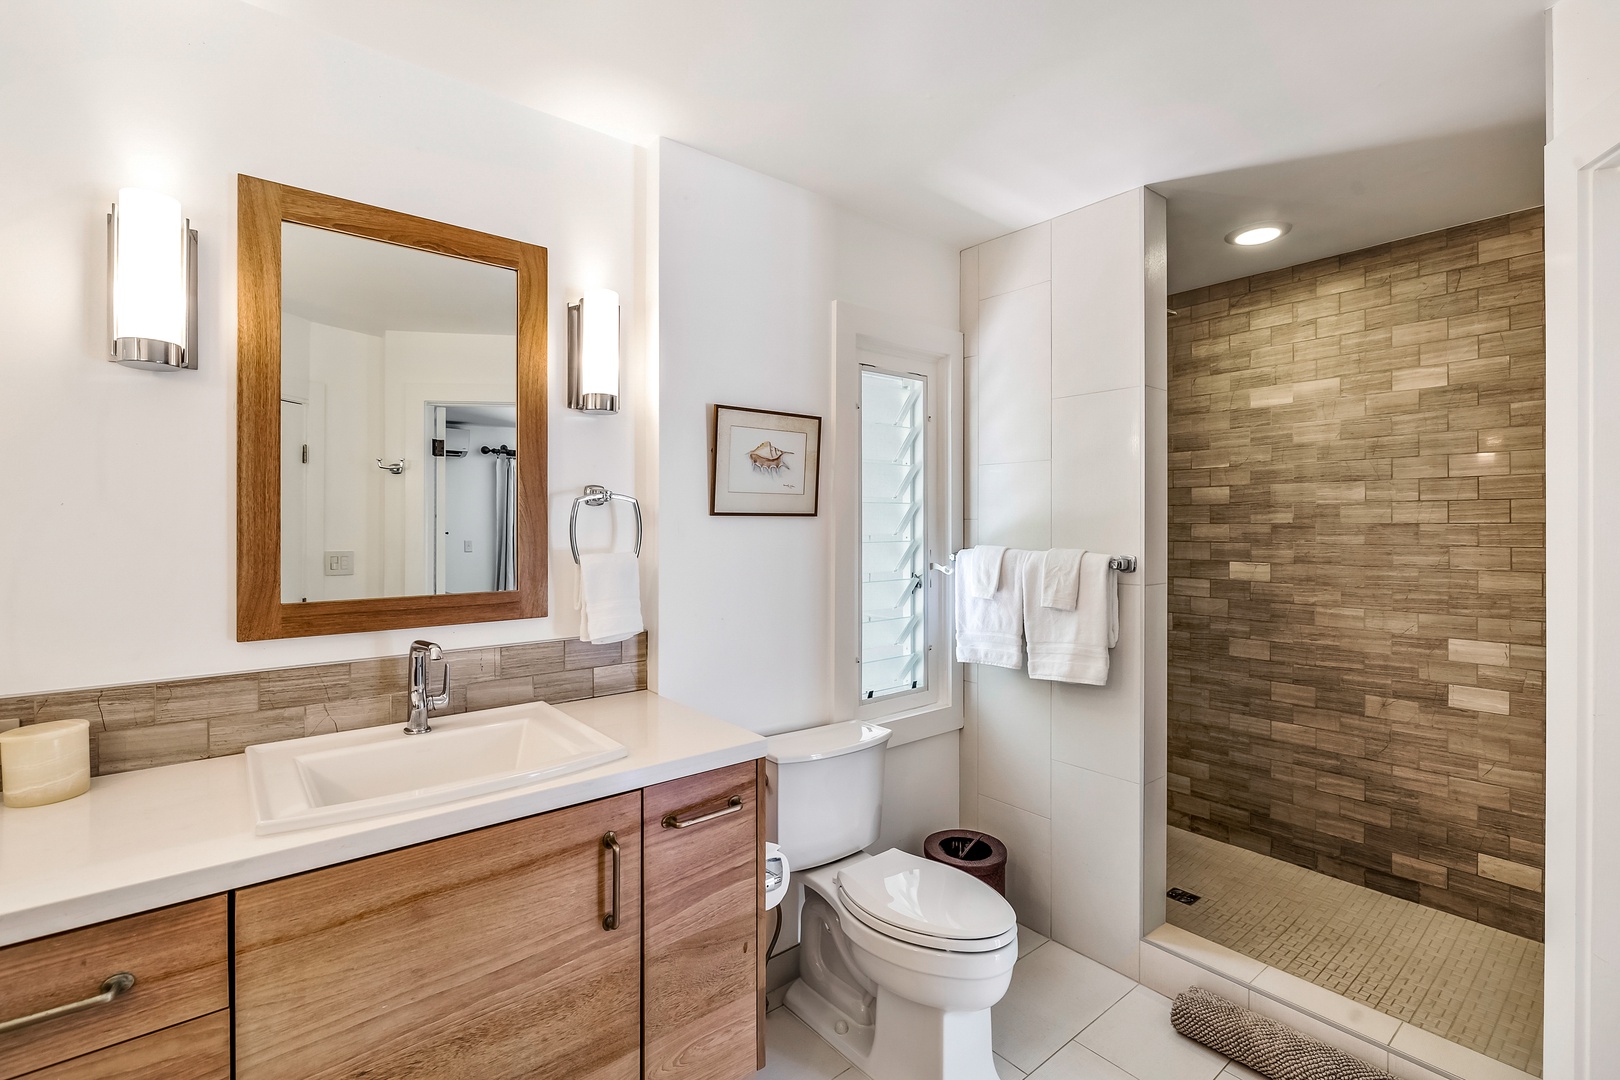 Kailua Vacation Rentals, Hale Ohana - This full bath has a walk-in shower as well